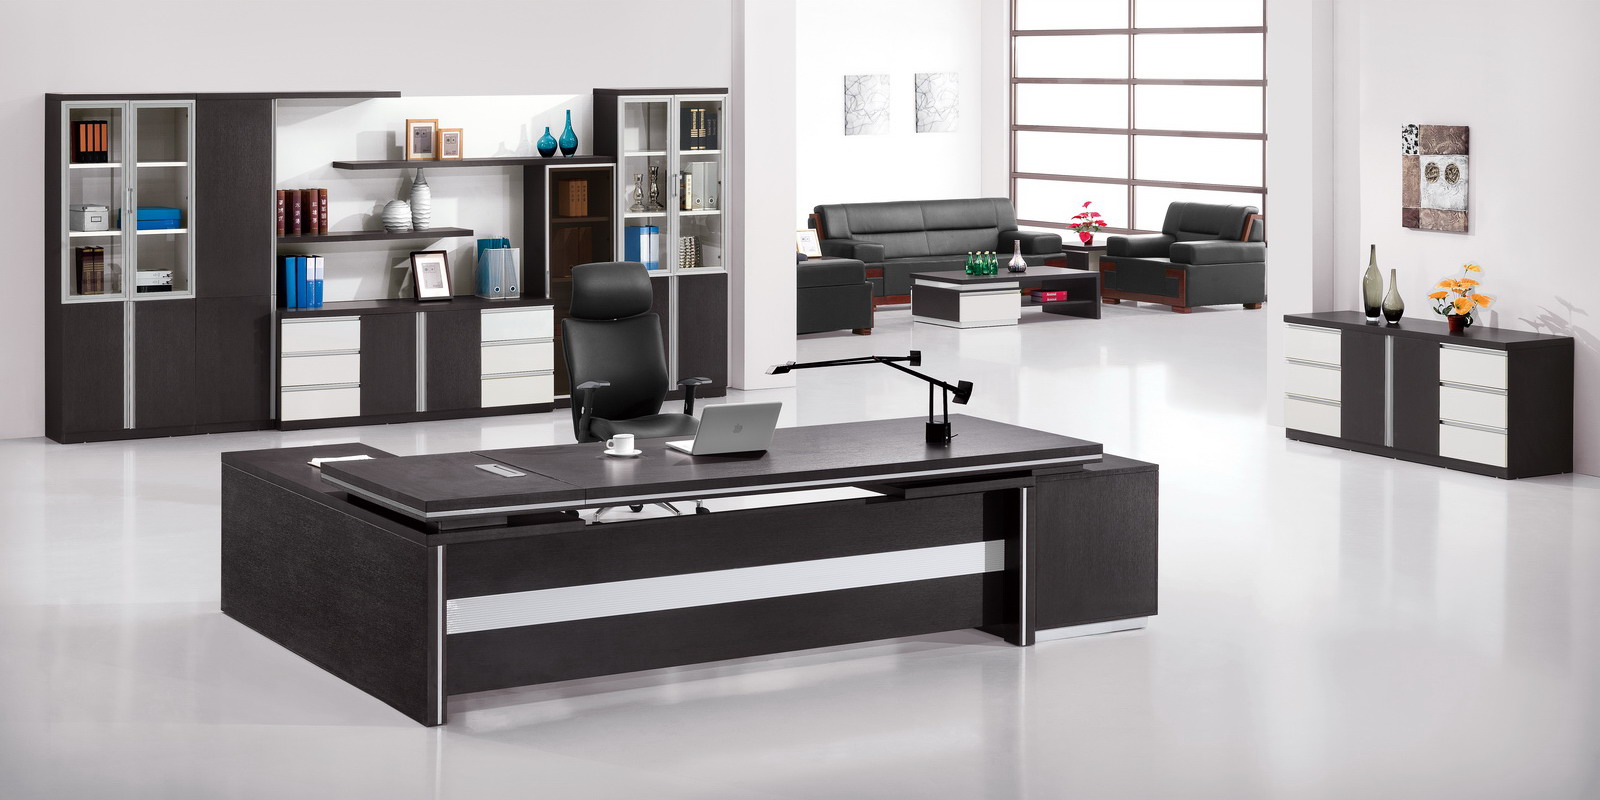 tips-on-how-to-take-care-and-maintain-office-furniture-and-fixtures